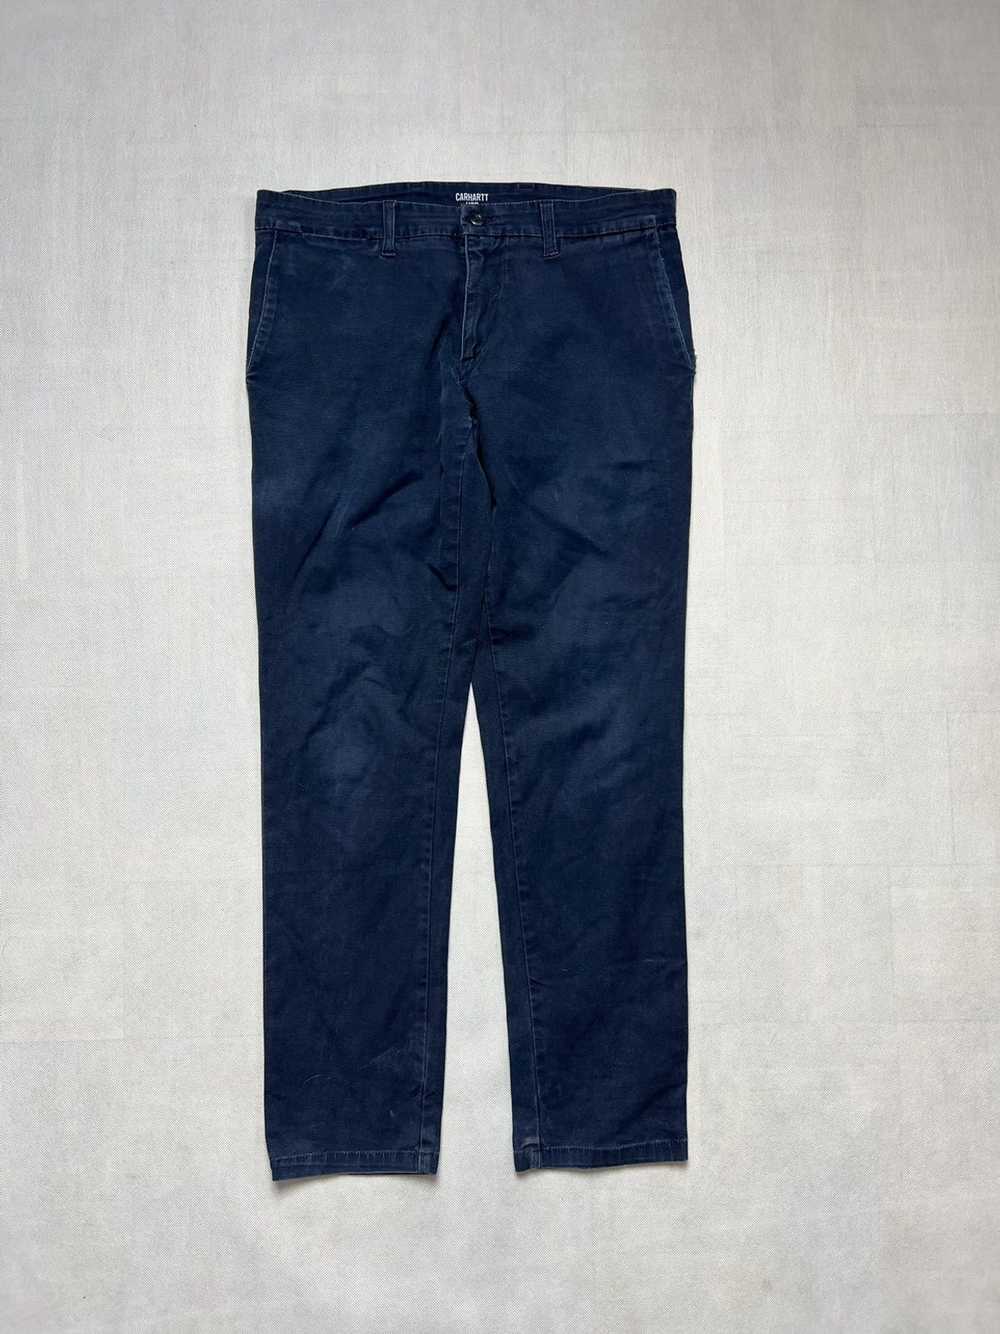 Carhartt Trousers pants Carhartt Washed - image 1